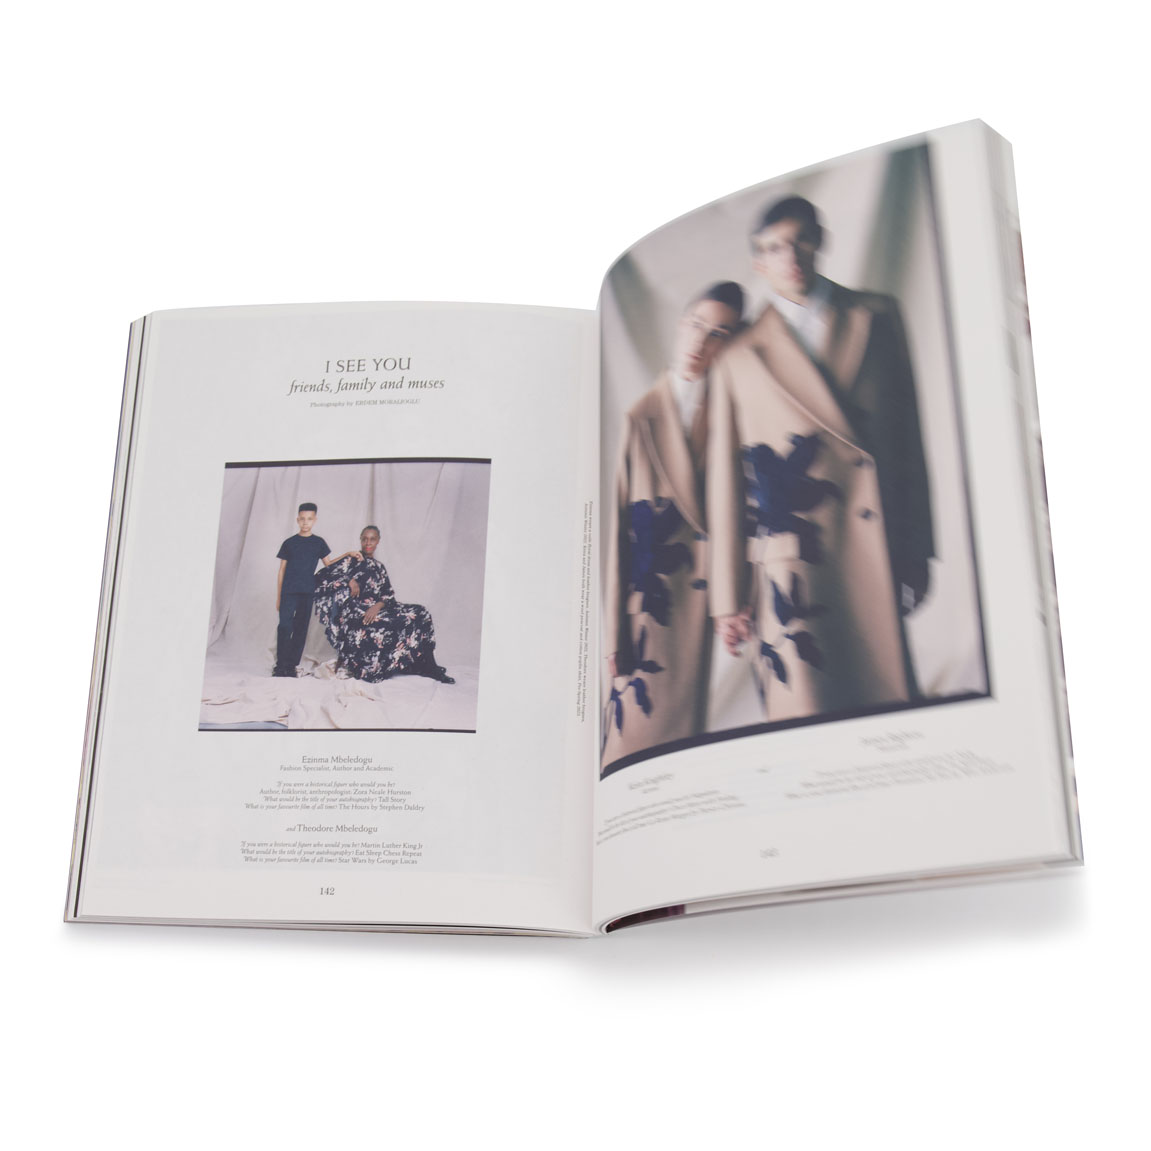 N24 A Magazine Curated By Erdem